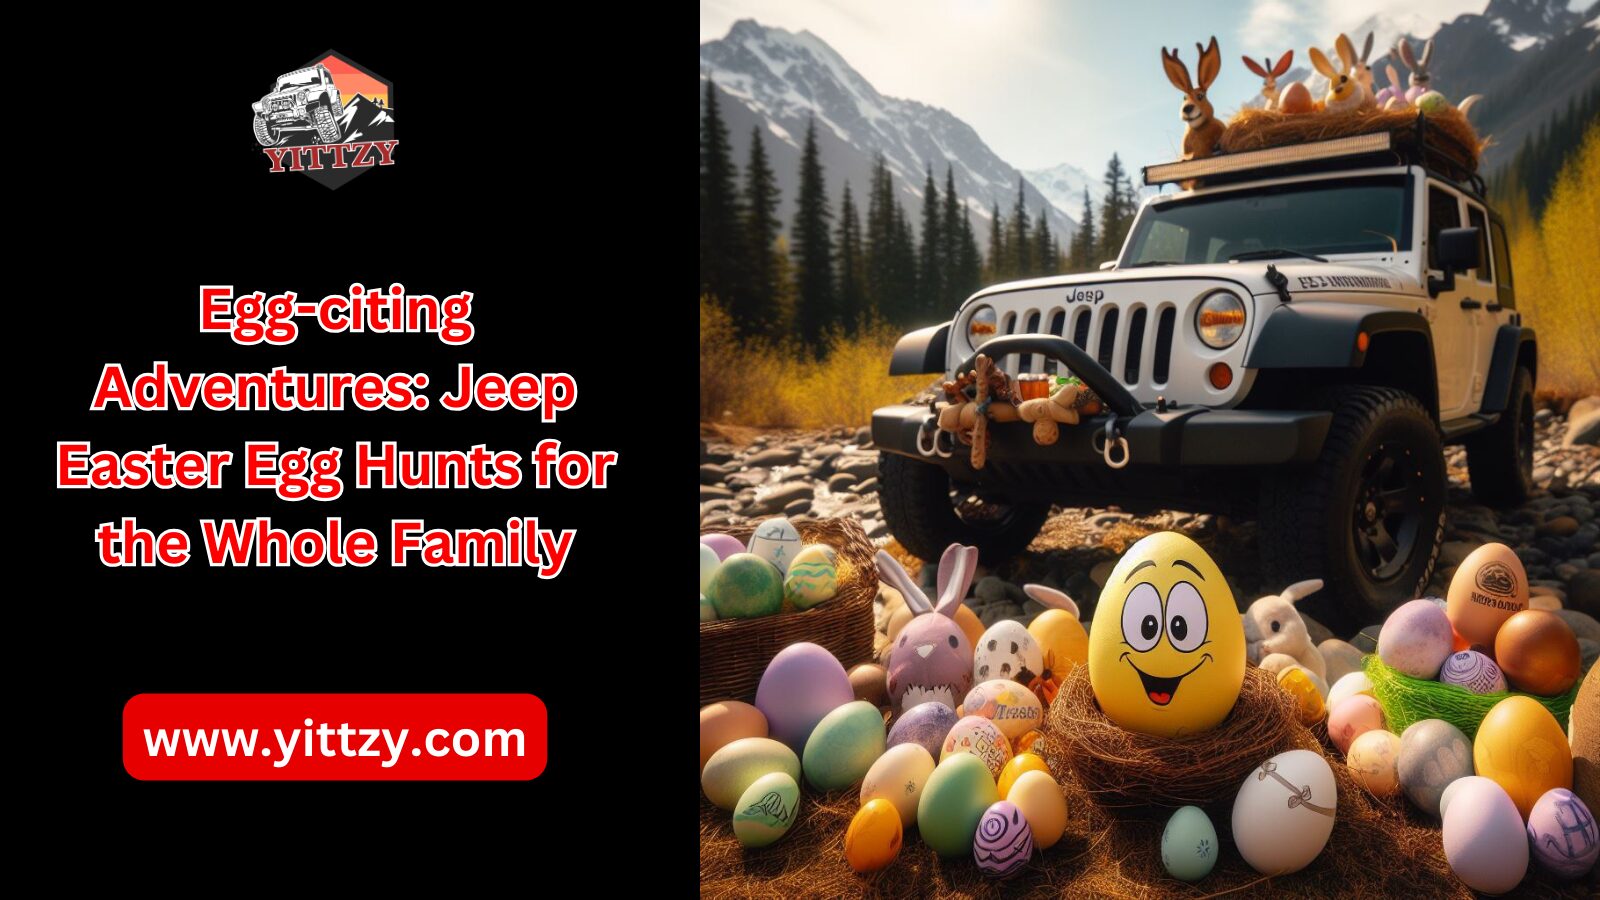 Egg-citing Adventures: Jeep Easter Egg Hunts for the Whole Family